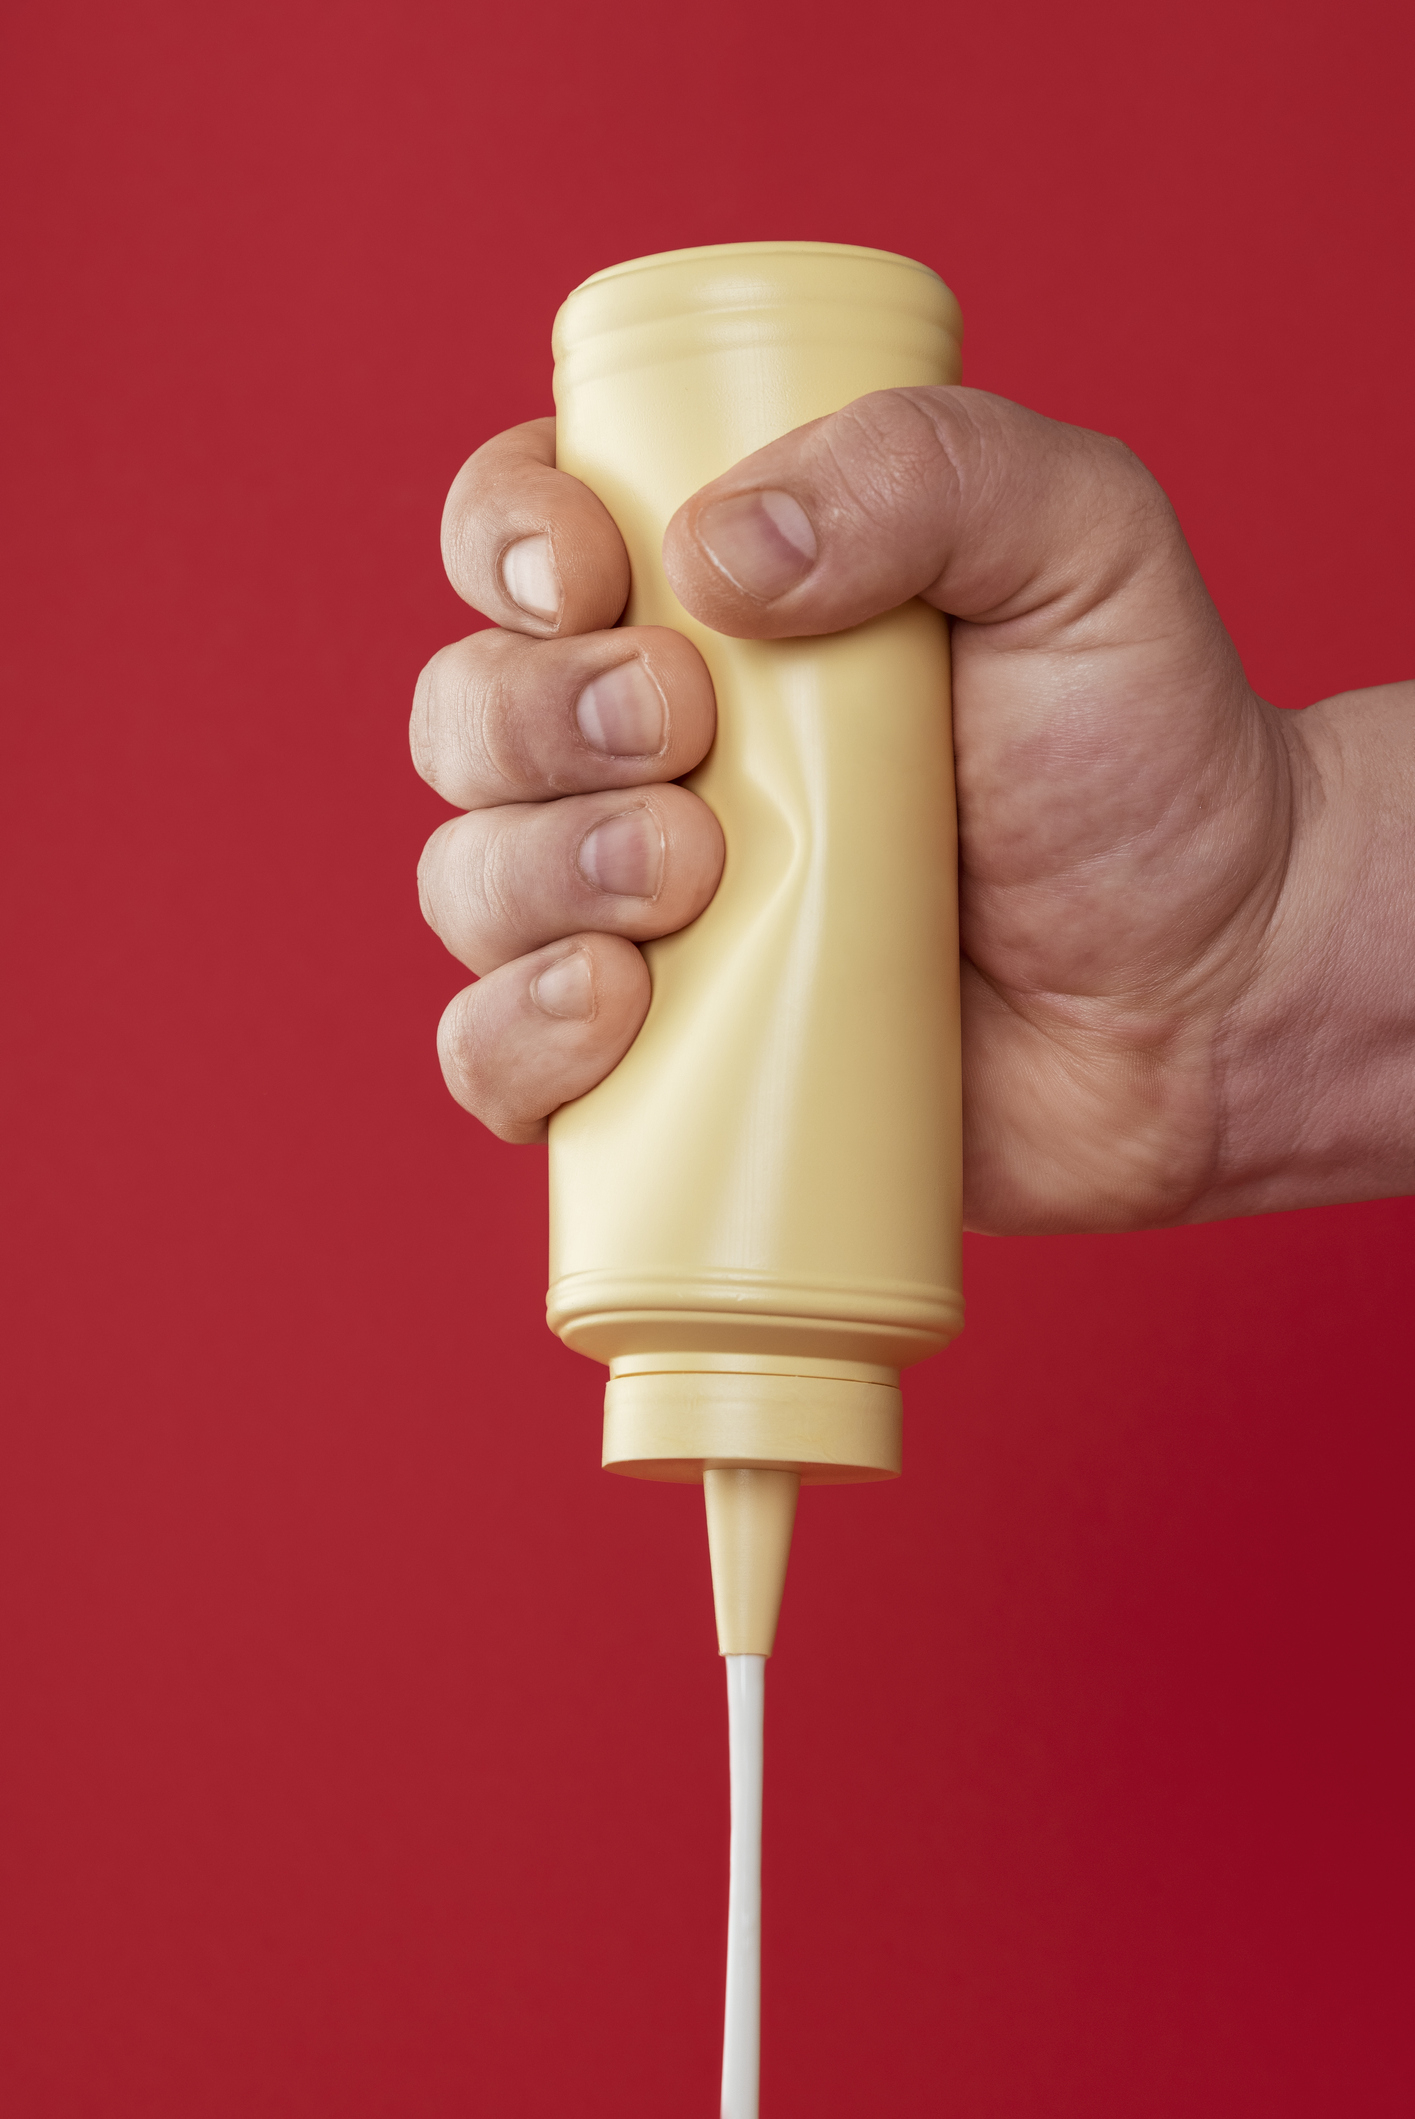 A hand squeezing a bottle of mayo